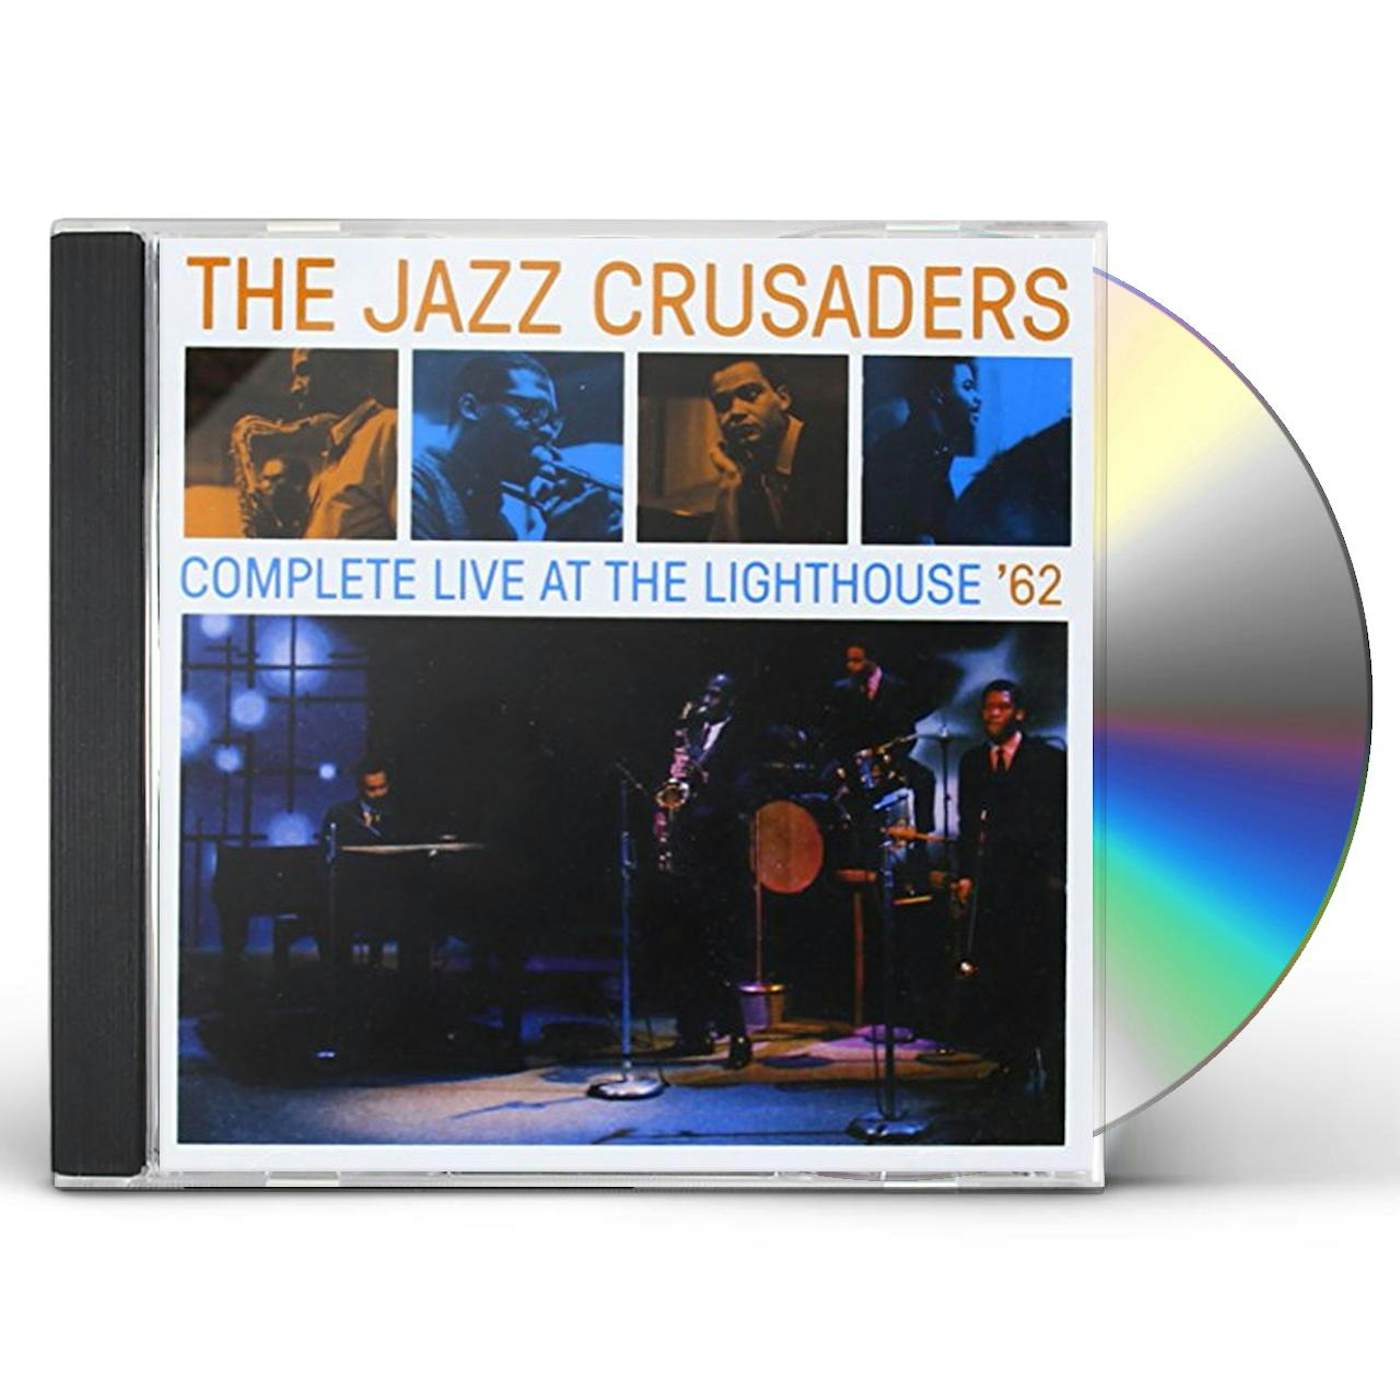 Jazz Crusaders COMPLETE LIVE AT THE LIGHTHOUSE CD